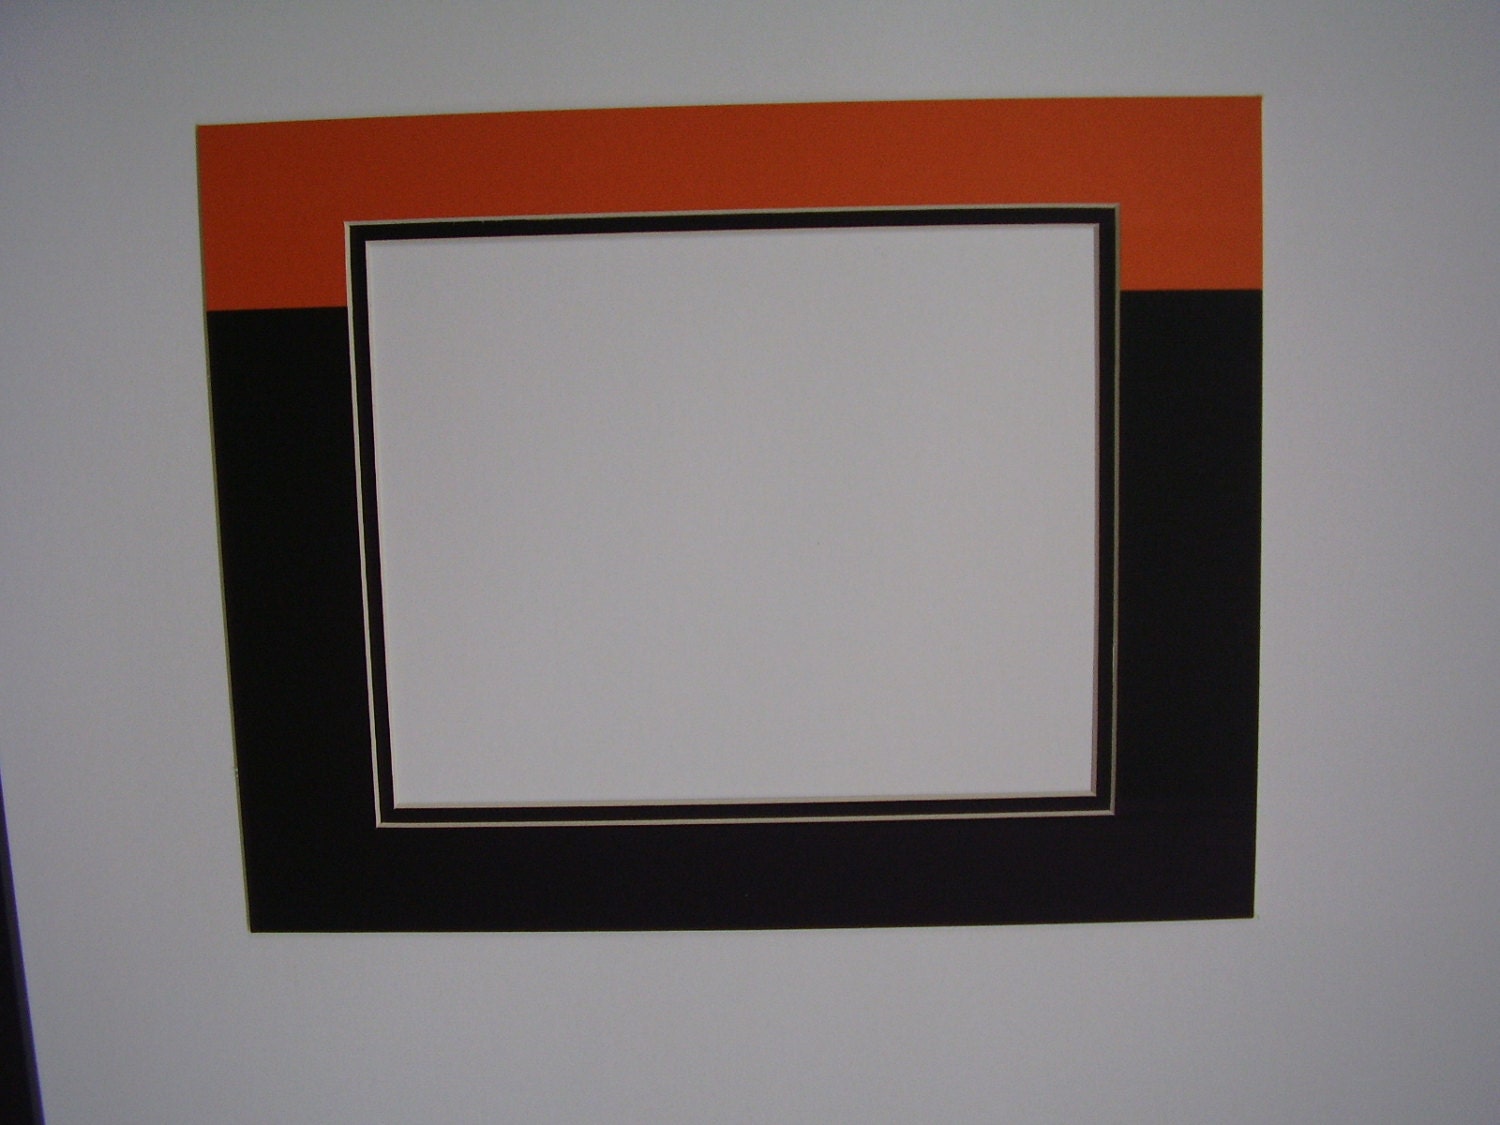 Picture Frame Mat School Colors Team Orange and Blue 8x10 for 5x7